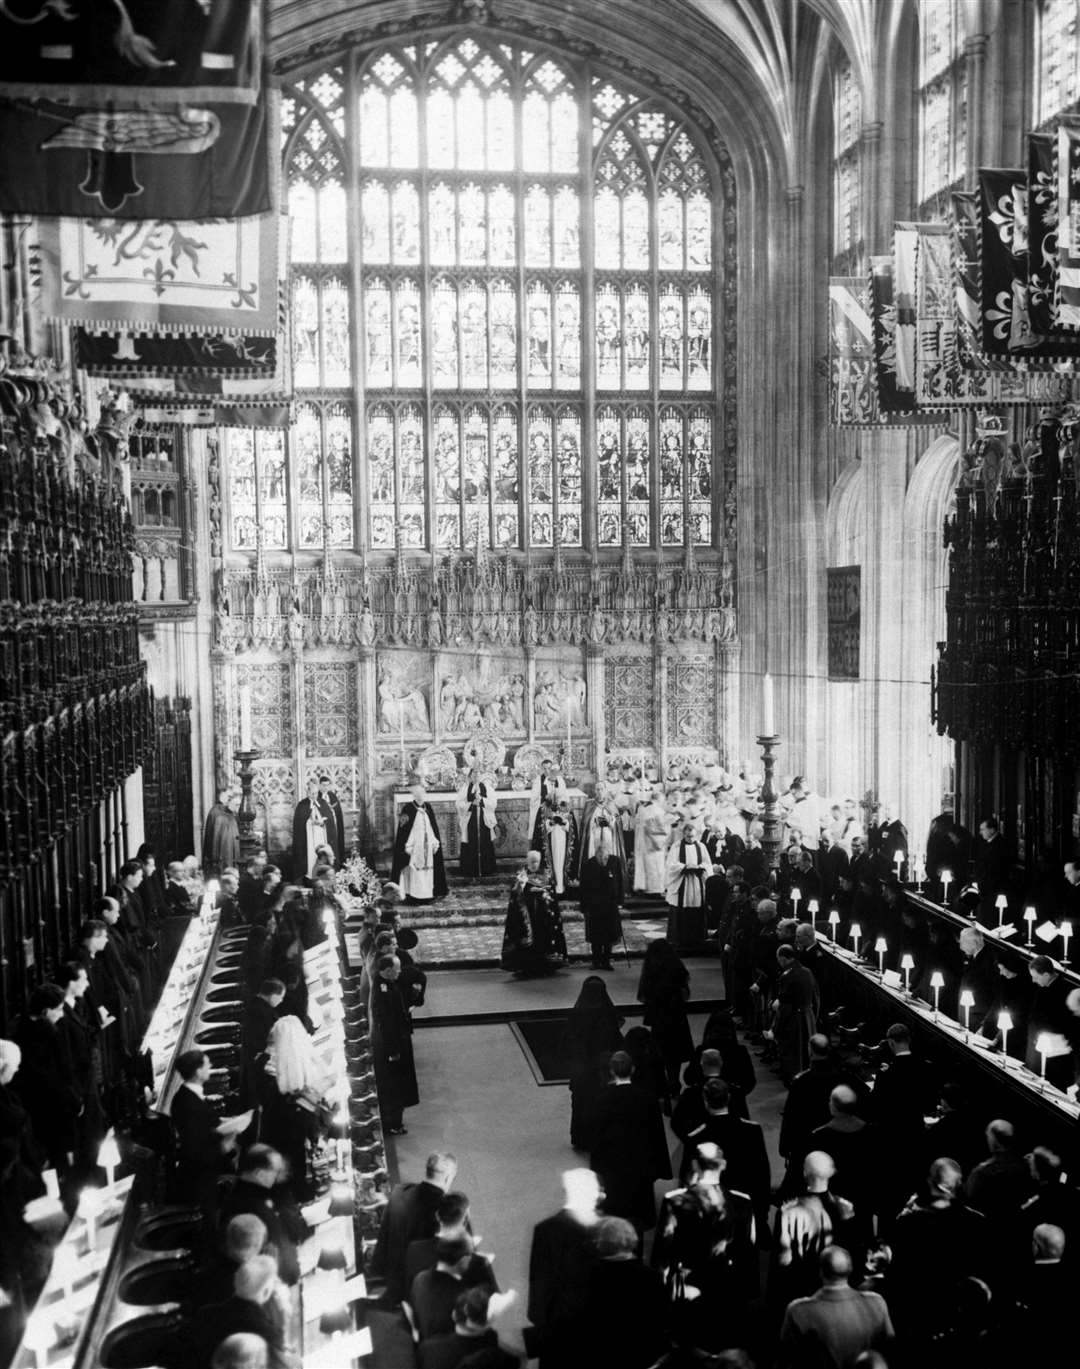 The Queen standing next to the opening of the Royal Vault at the funeral of her father George VI in 1952 (PA)